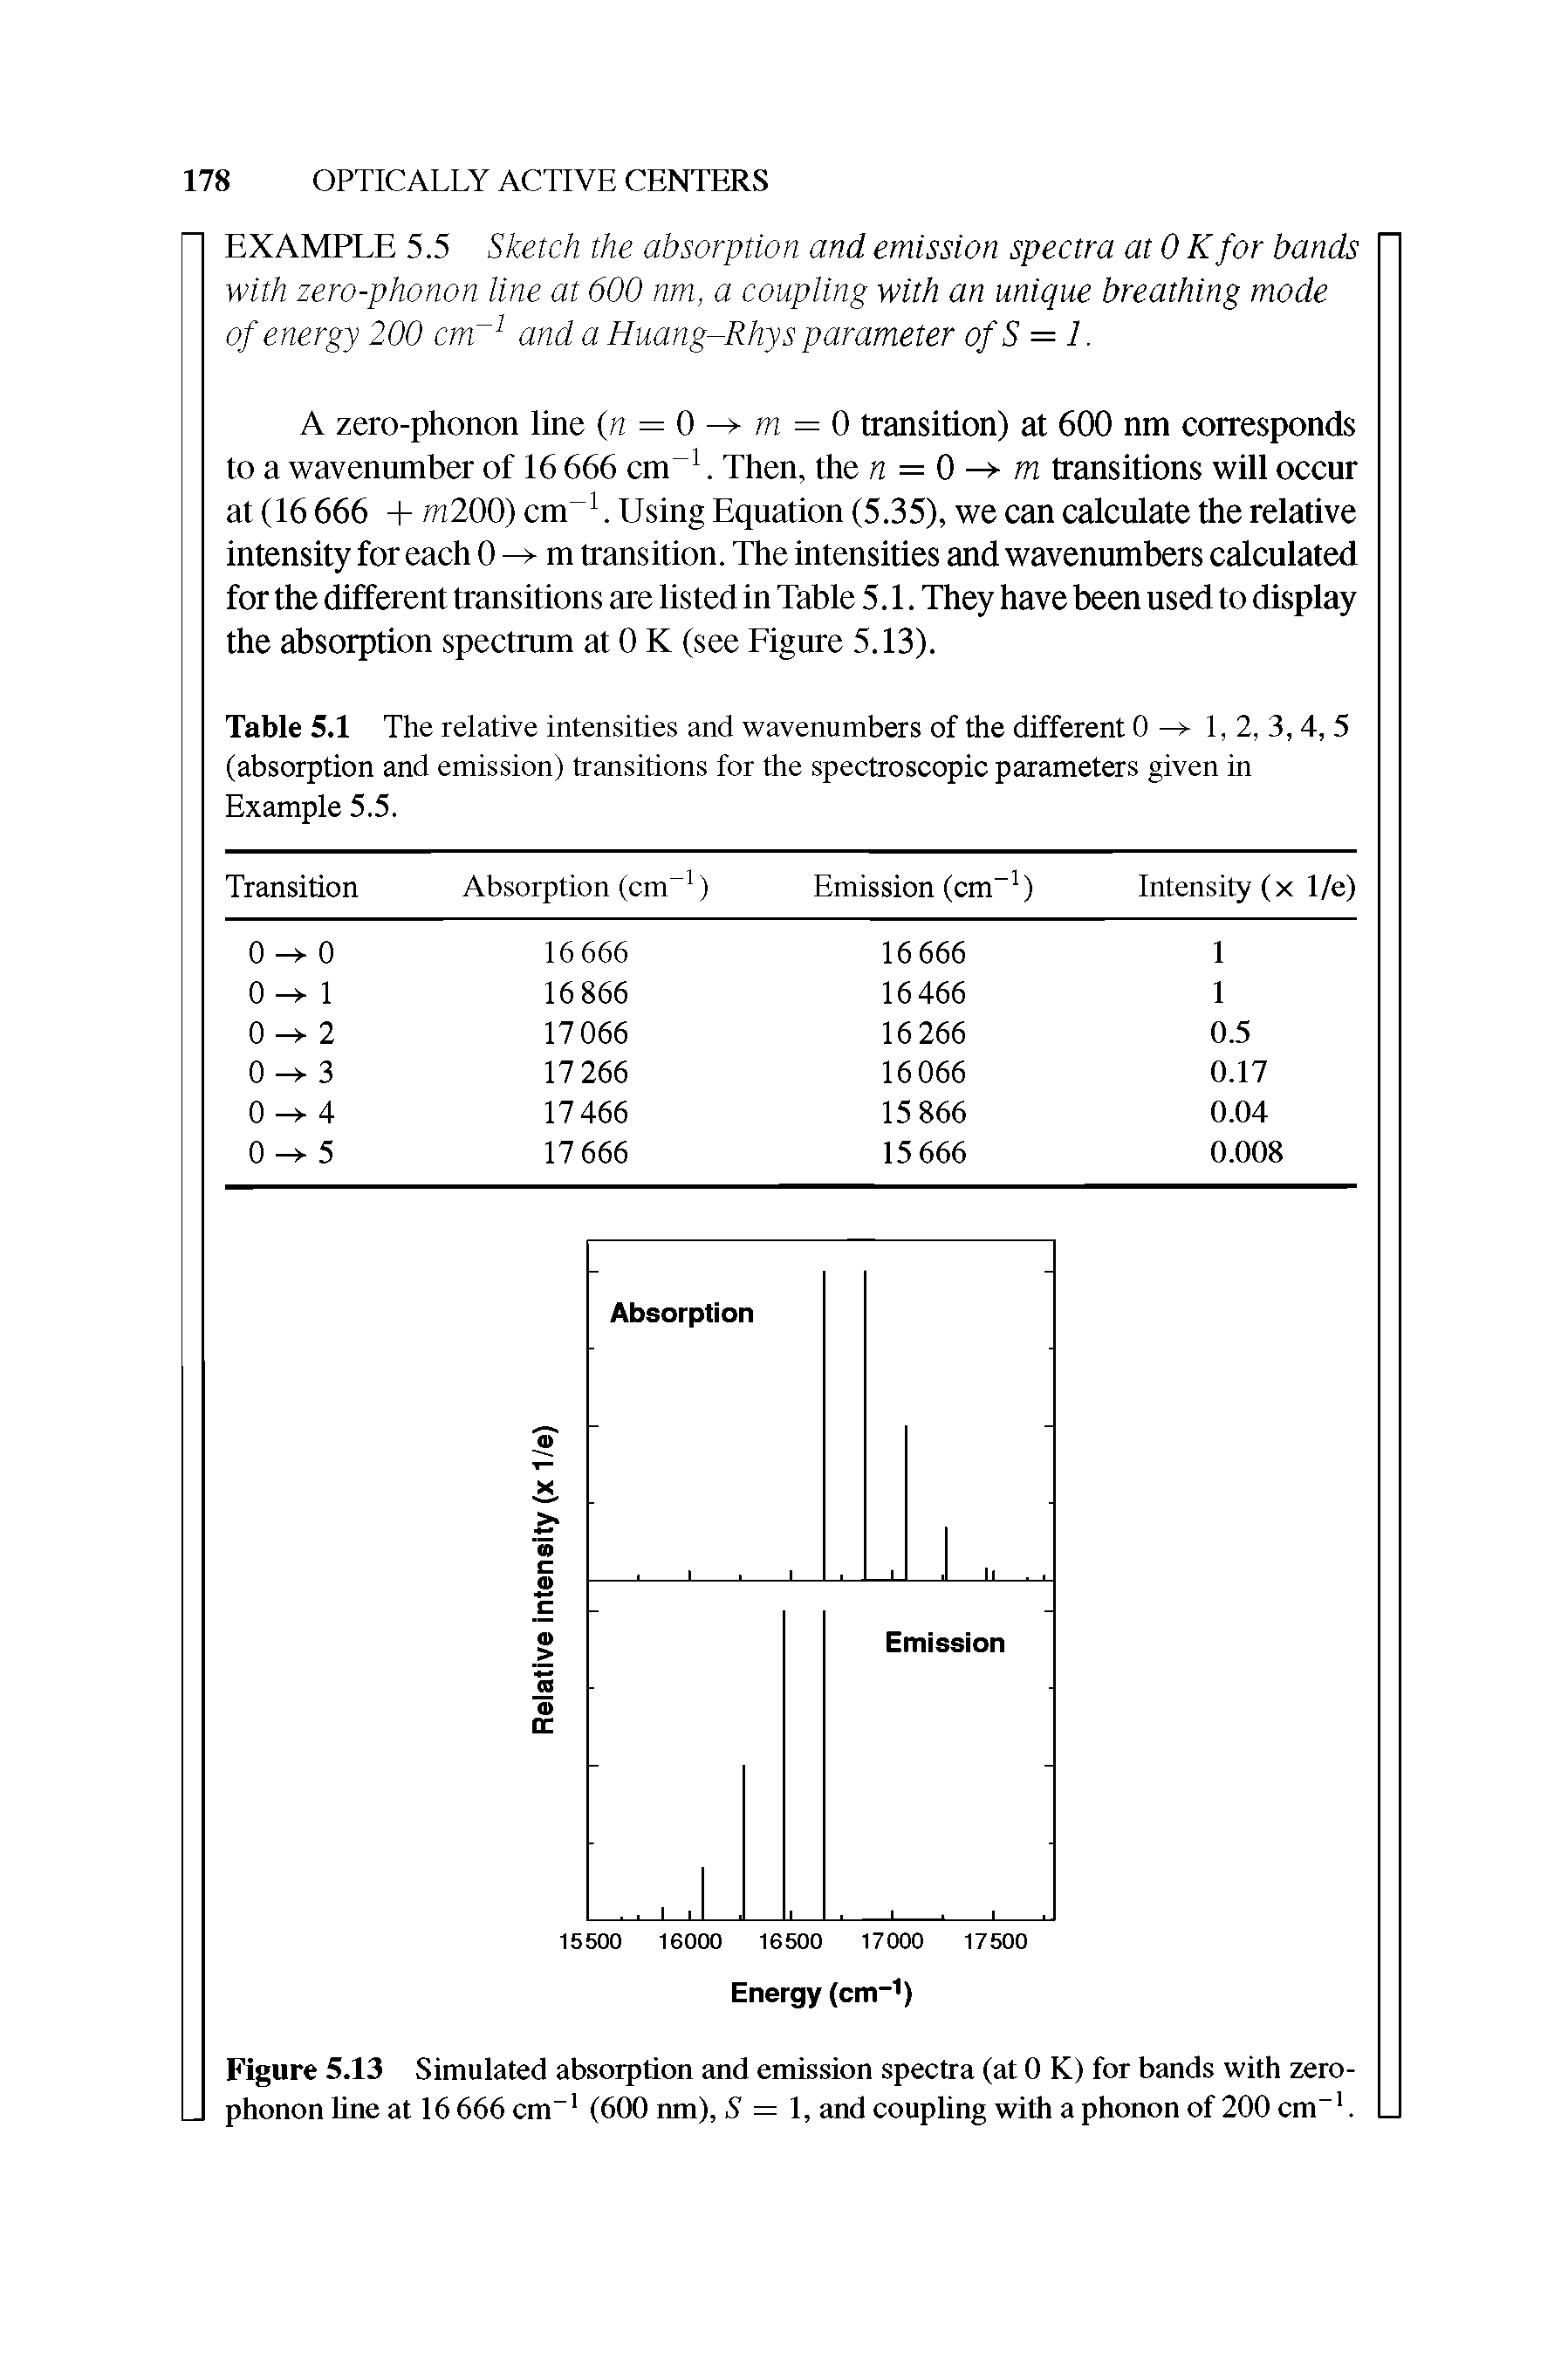 Table 5.1 The relative intensities and wavenumbers of the different 0 1, 2, 3, 4, 5 (absorption and emission) transitions for the spectroscopic parameters given in Example 5.5.